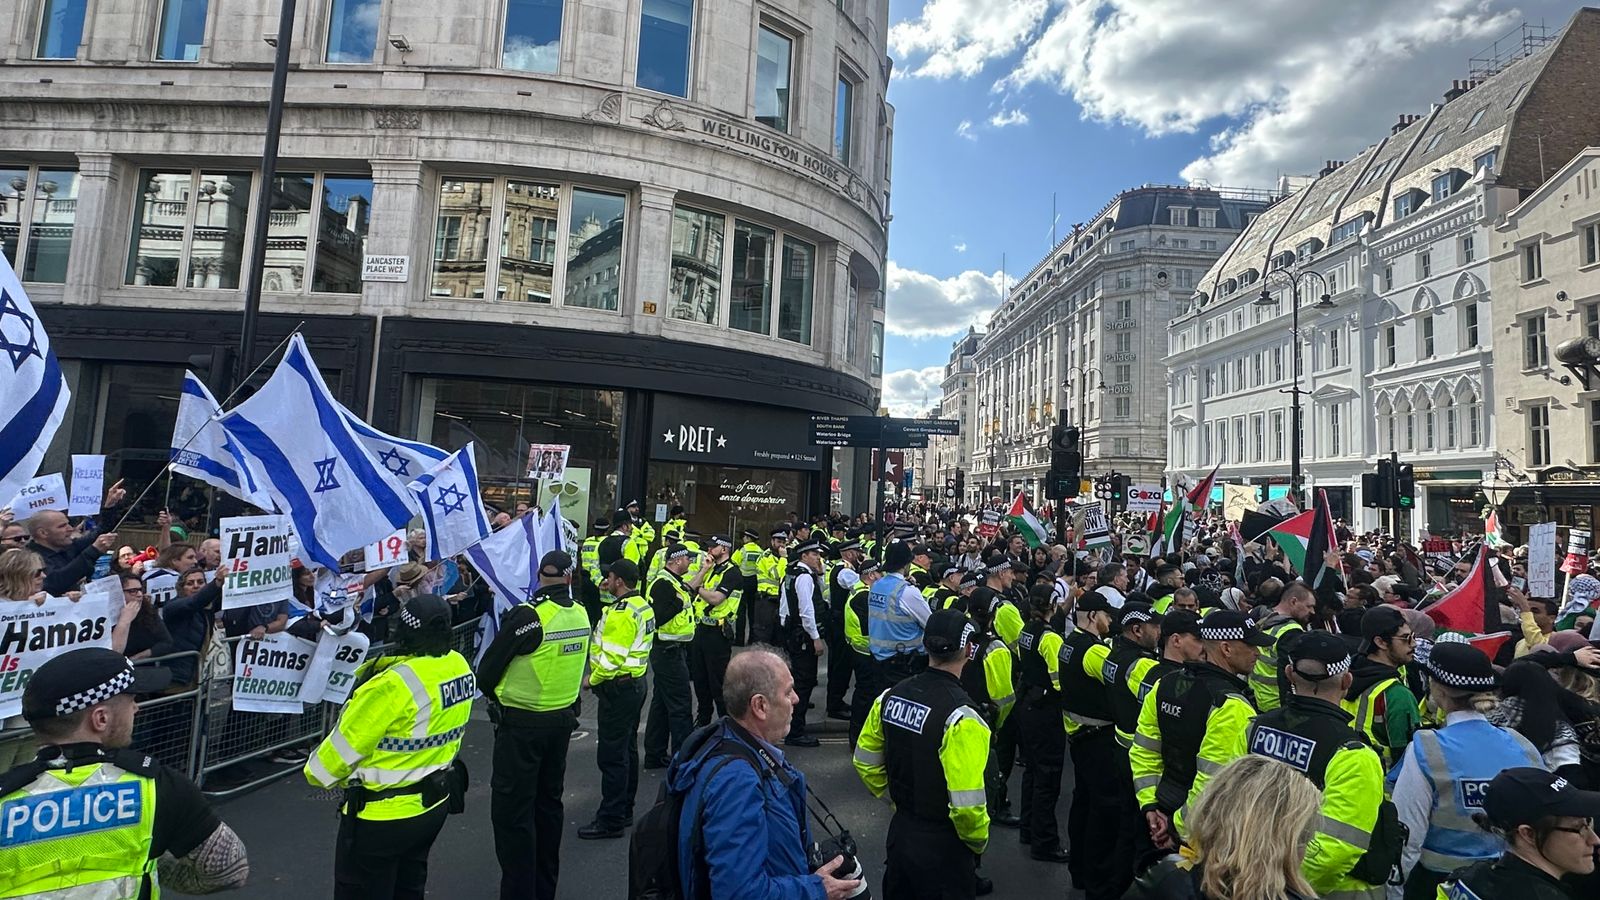 Rival Gaza protests in London seethed with mutual animosity - providing visceral evidence of deep and angry divides